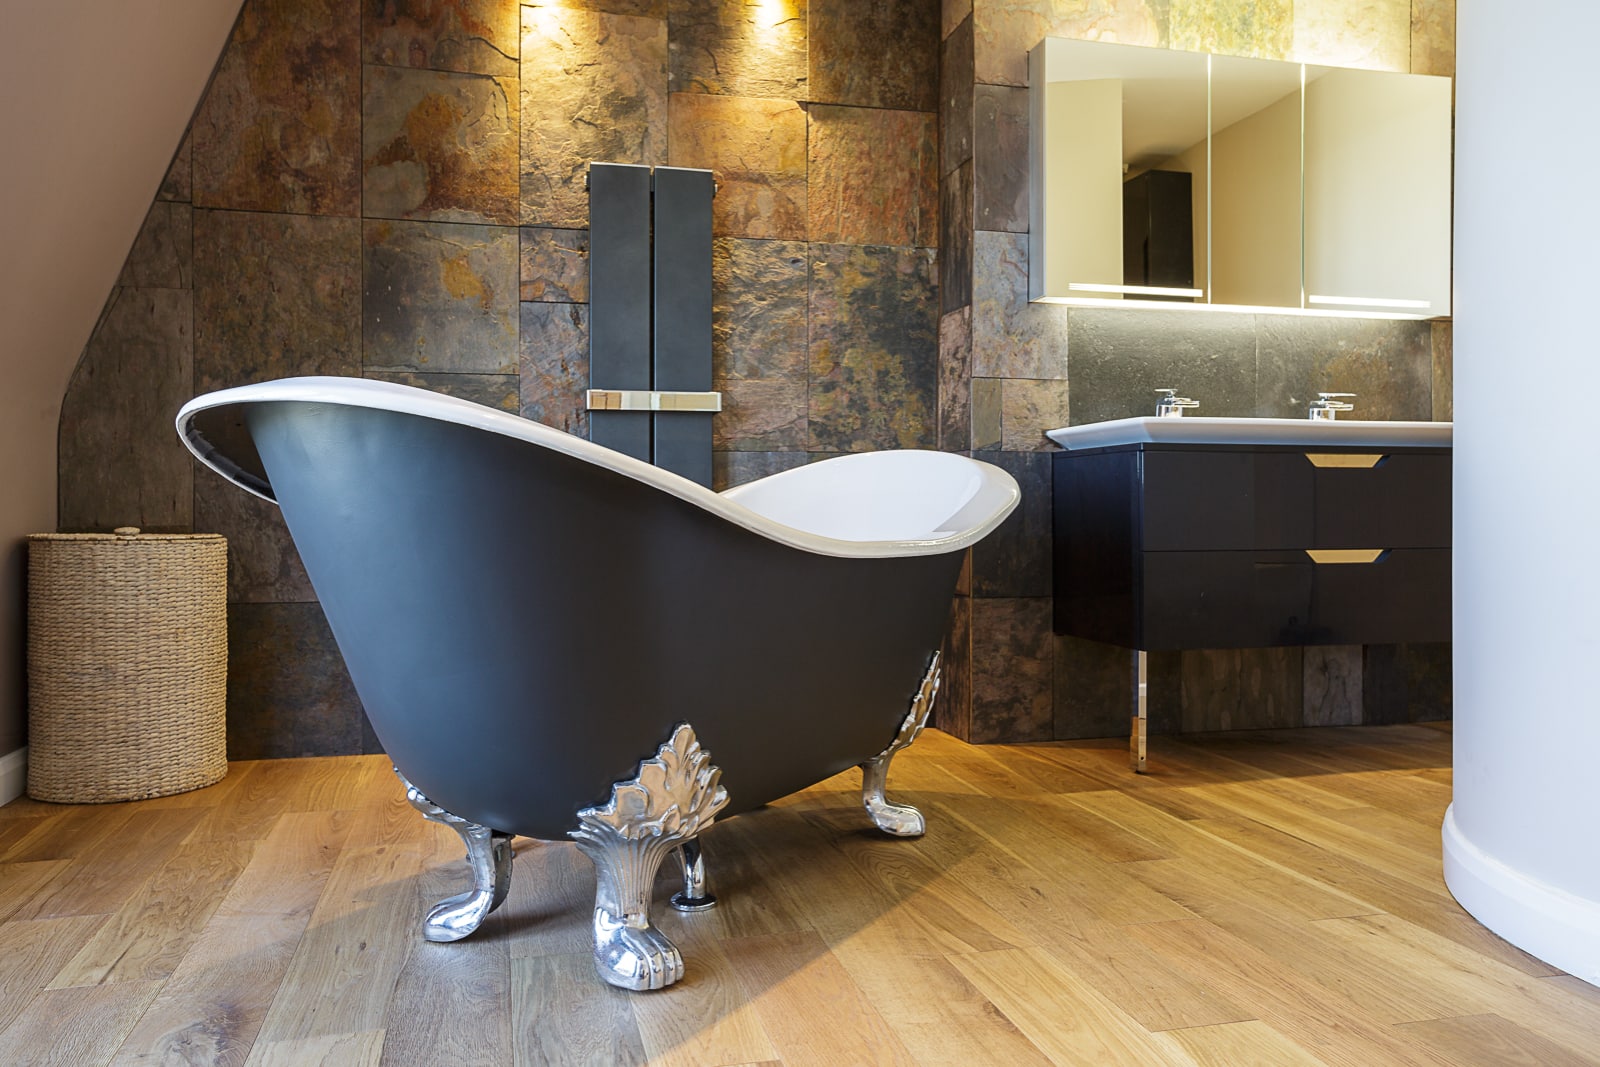 interior view of bathroom area in a residential property close up of freestanding roll top bath